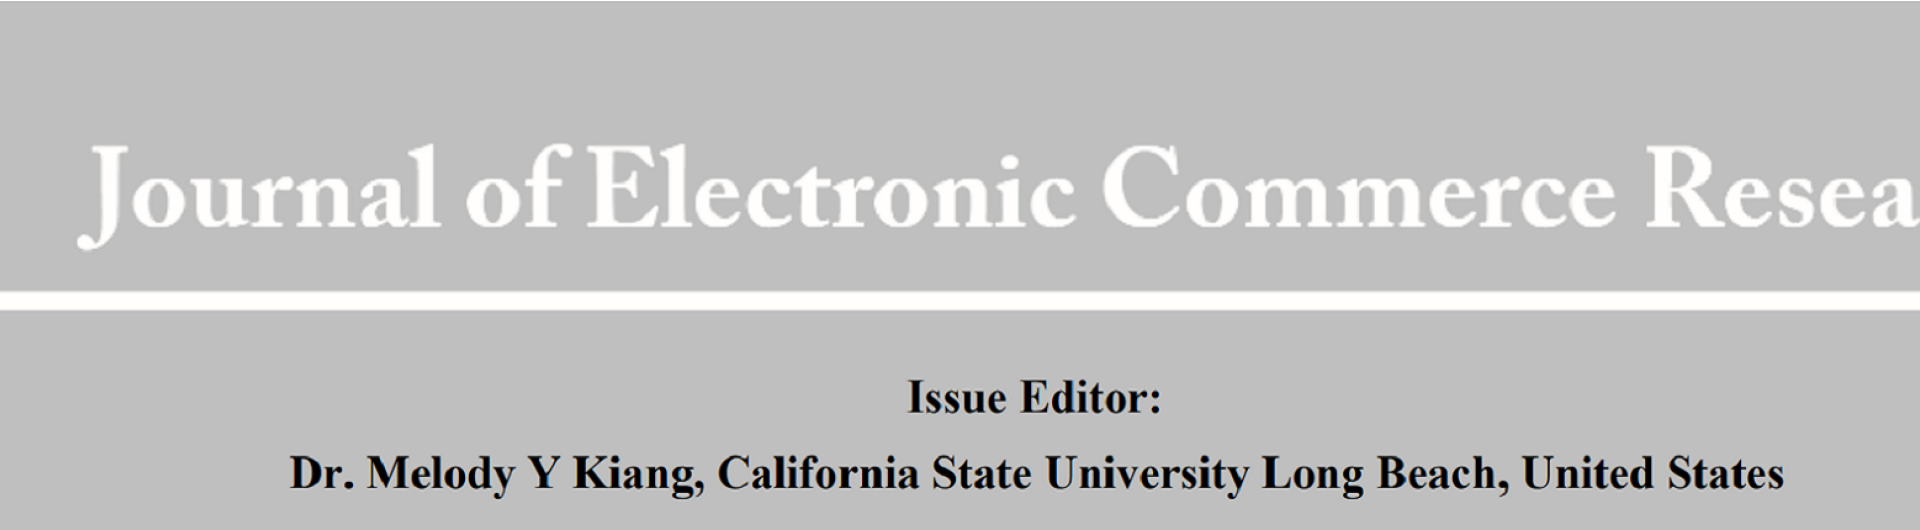 JERC Journal of Electronic Commerce Research